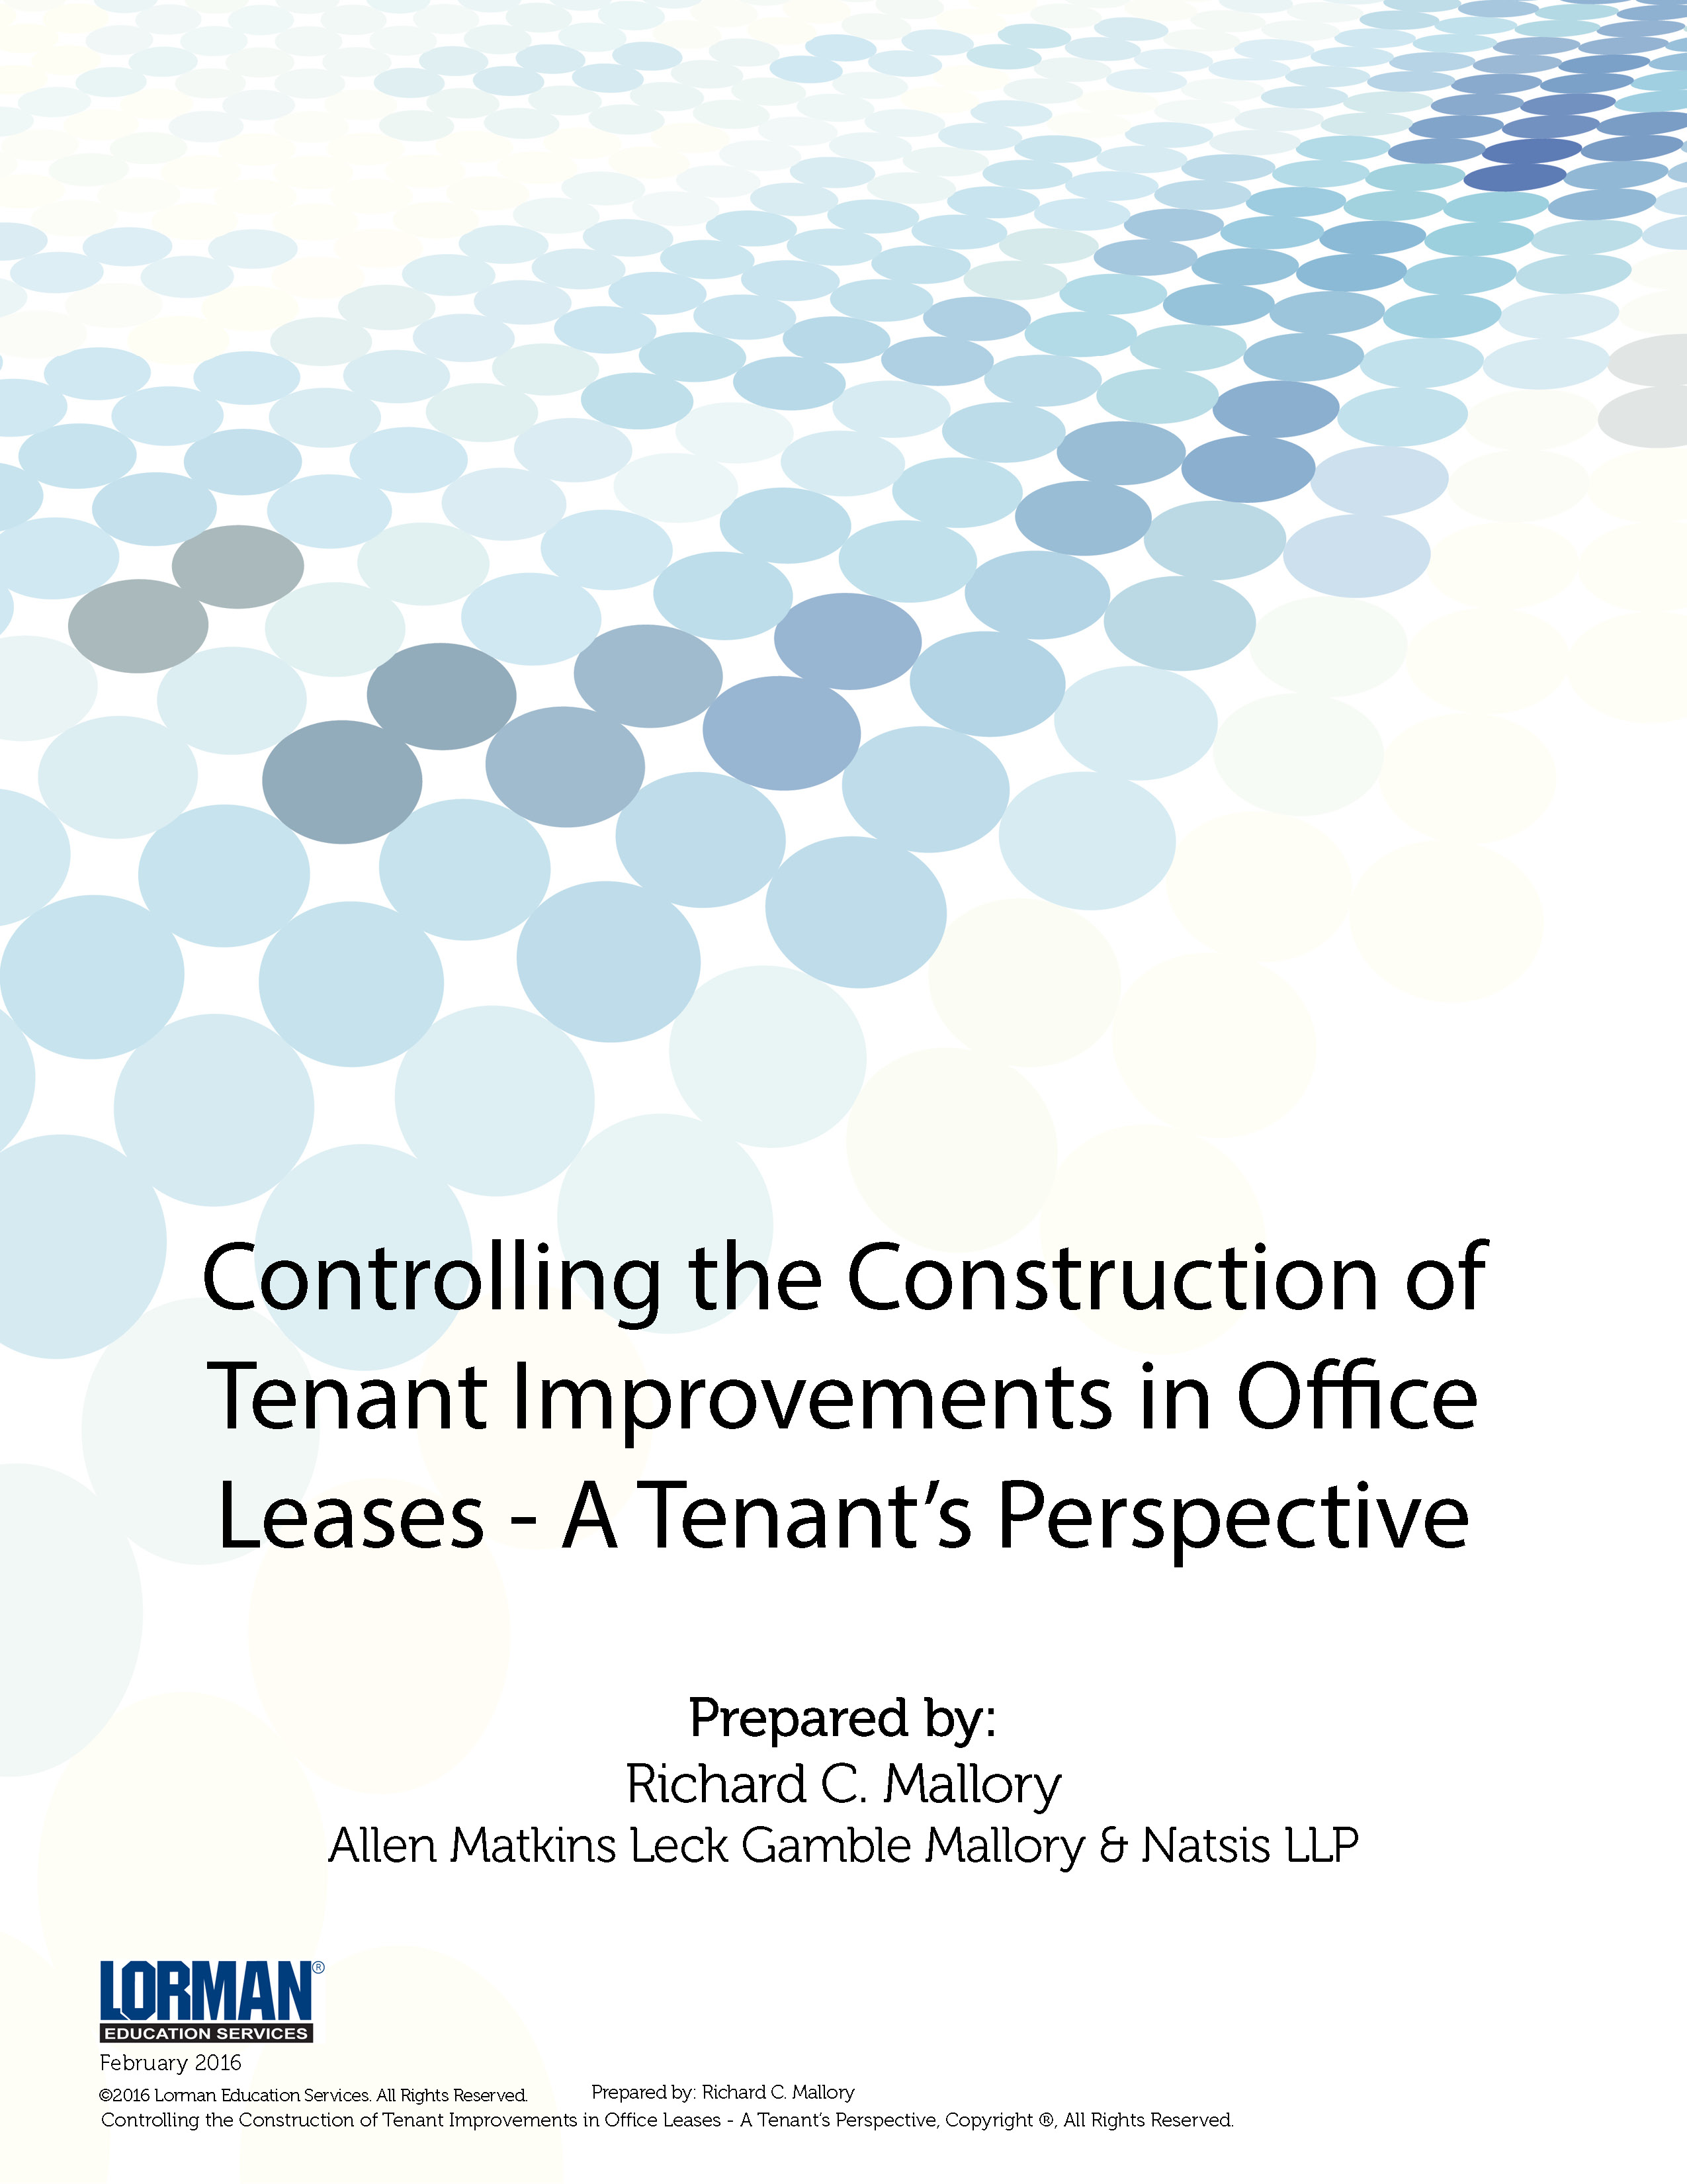 Controlling the Construction of Tenant Improvements in Office Leases - A Tenant’s Perspective